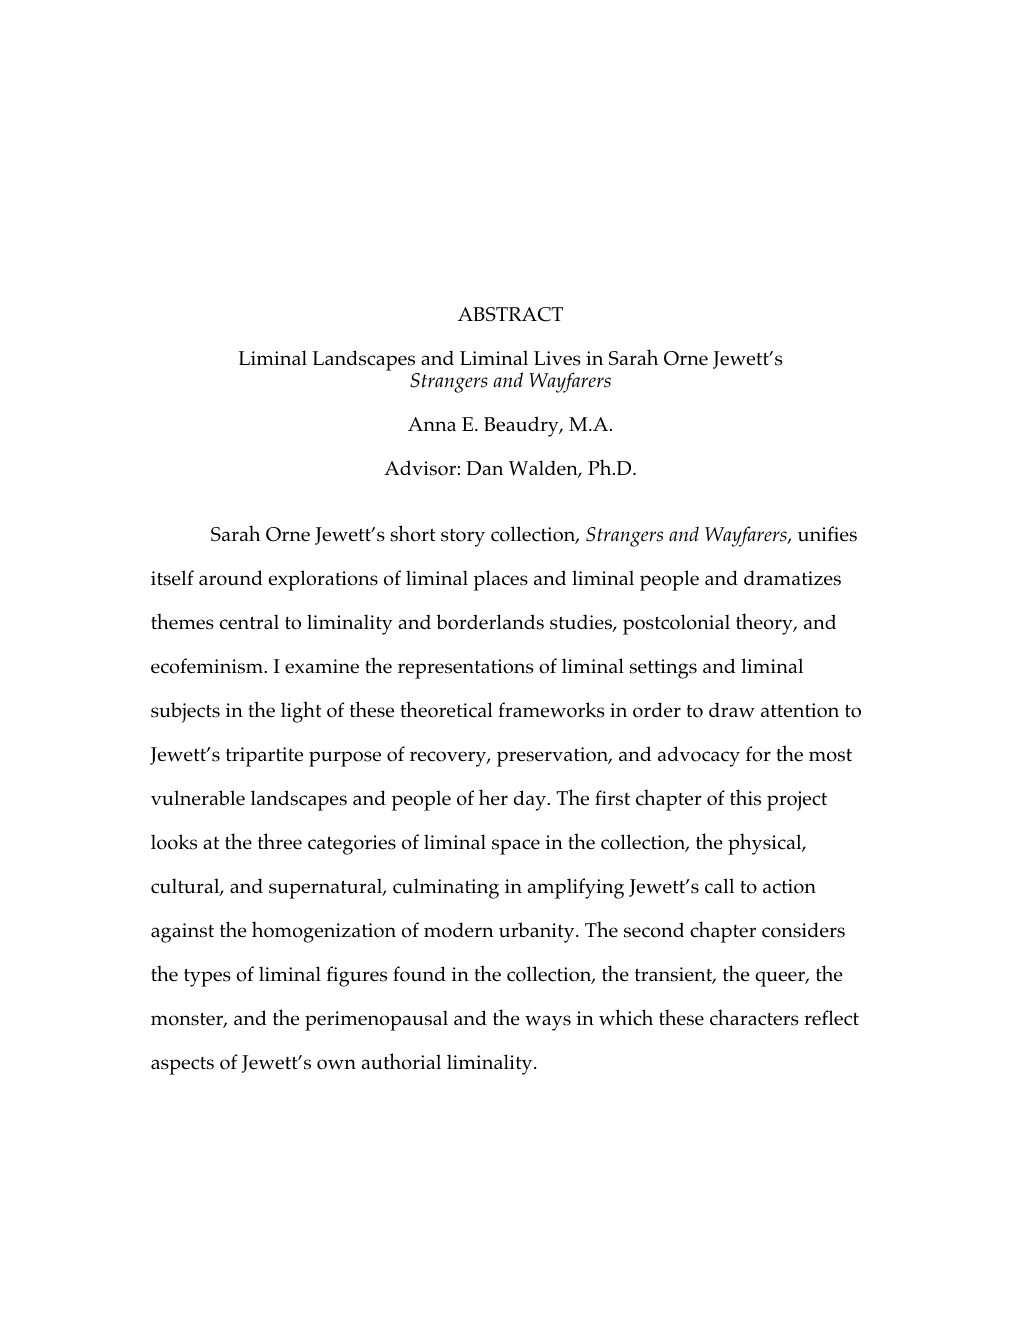 Formatted Master's Thesis